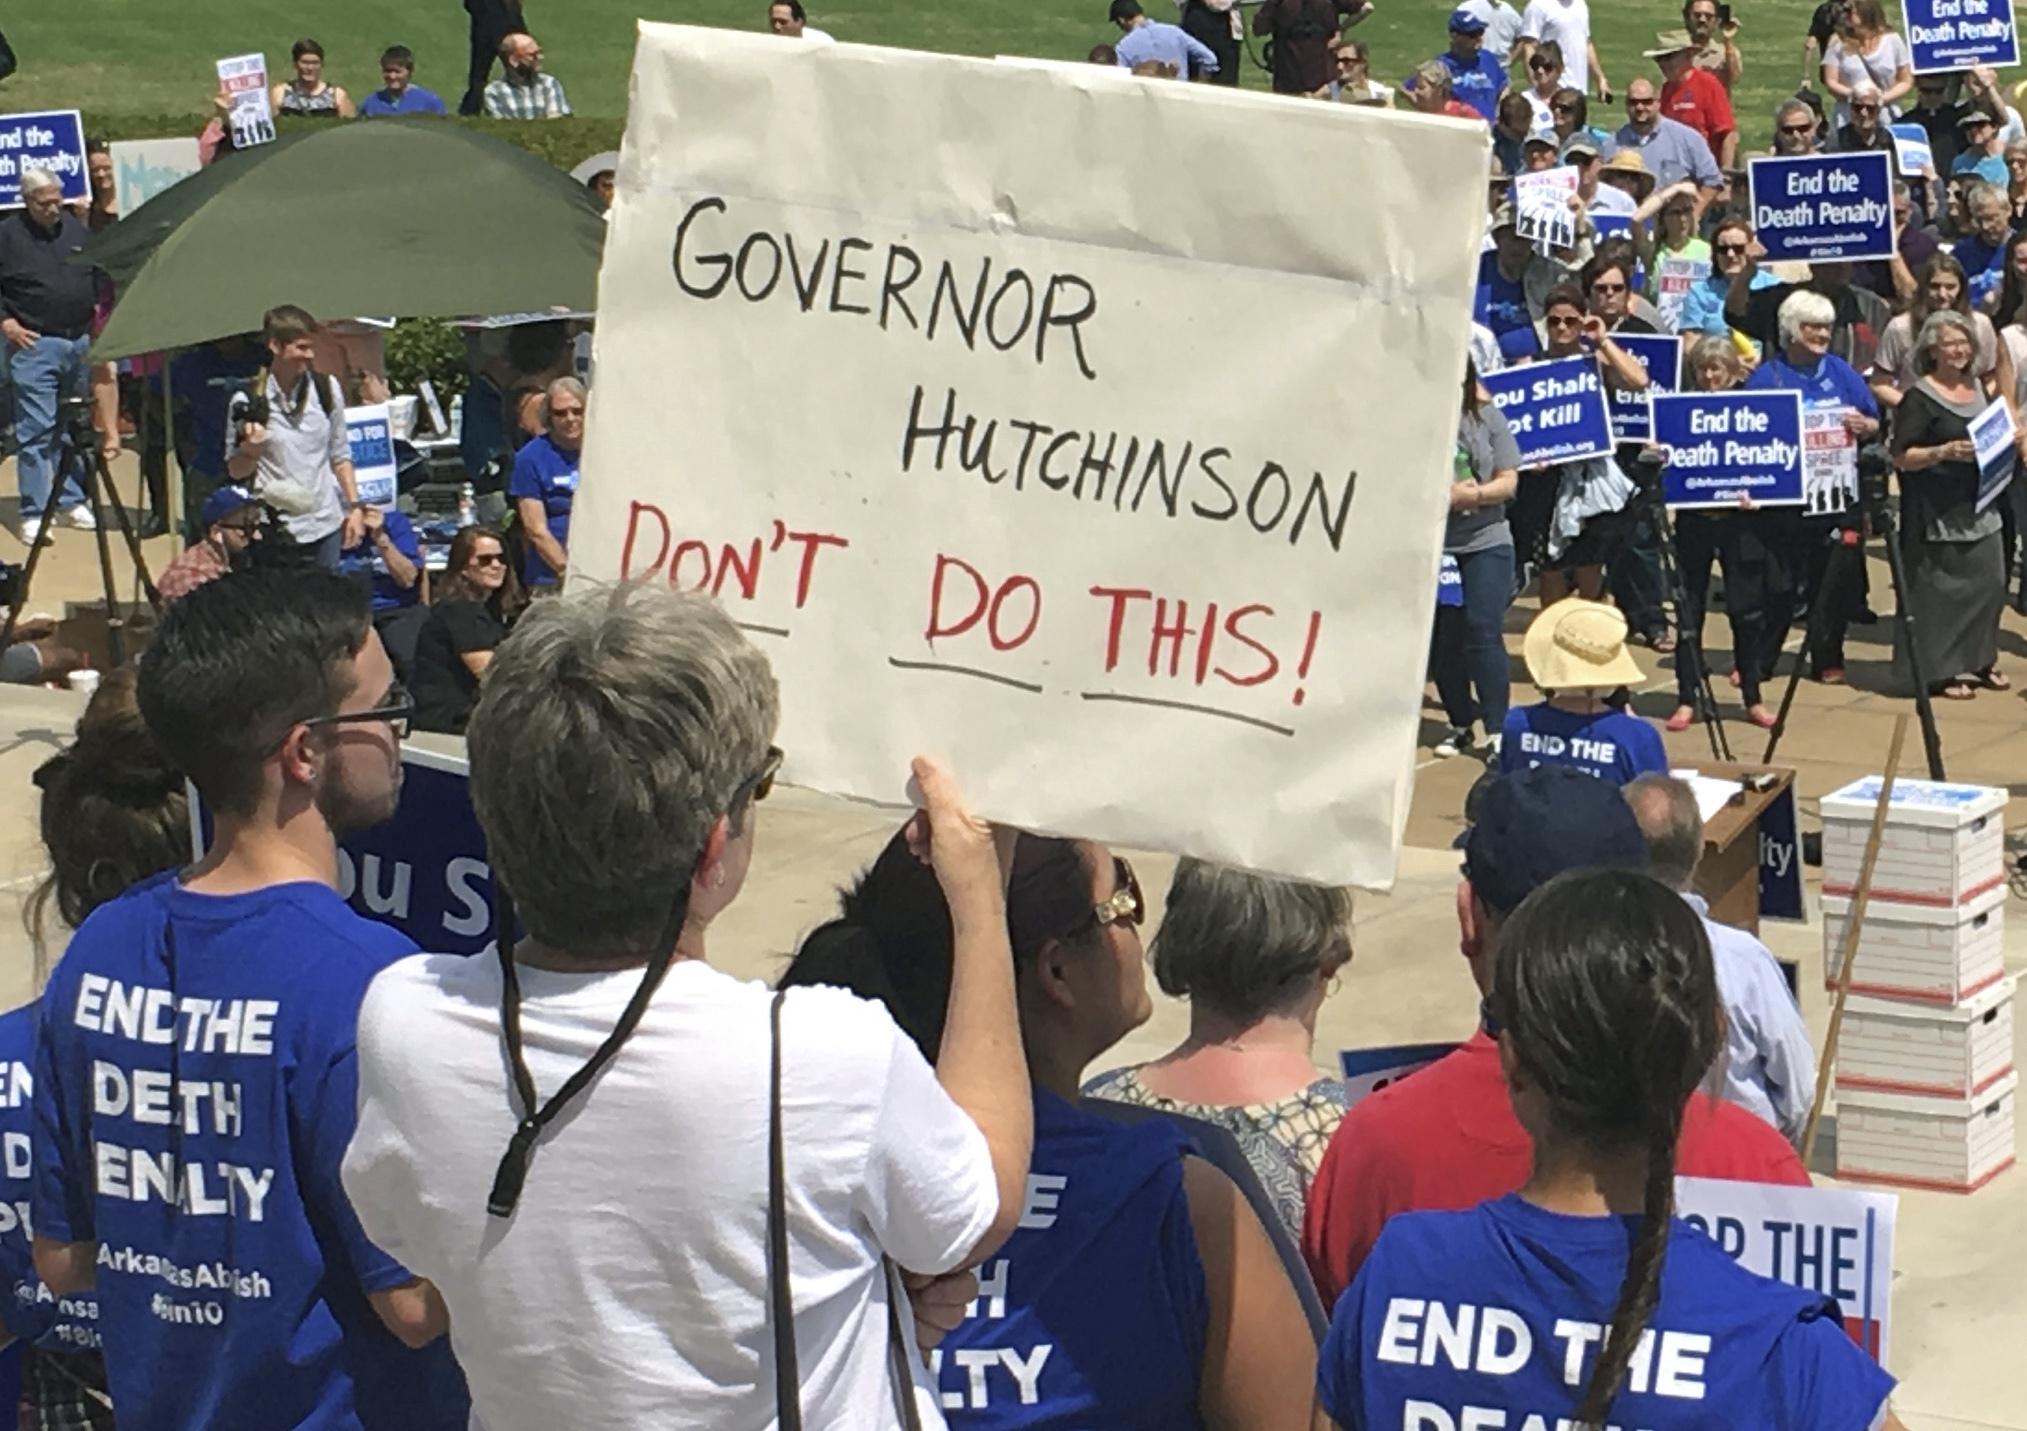 Protesters gather outside the state Capitol building in Little Rock, Arkansas to protest the planned executions of eight inmates